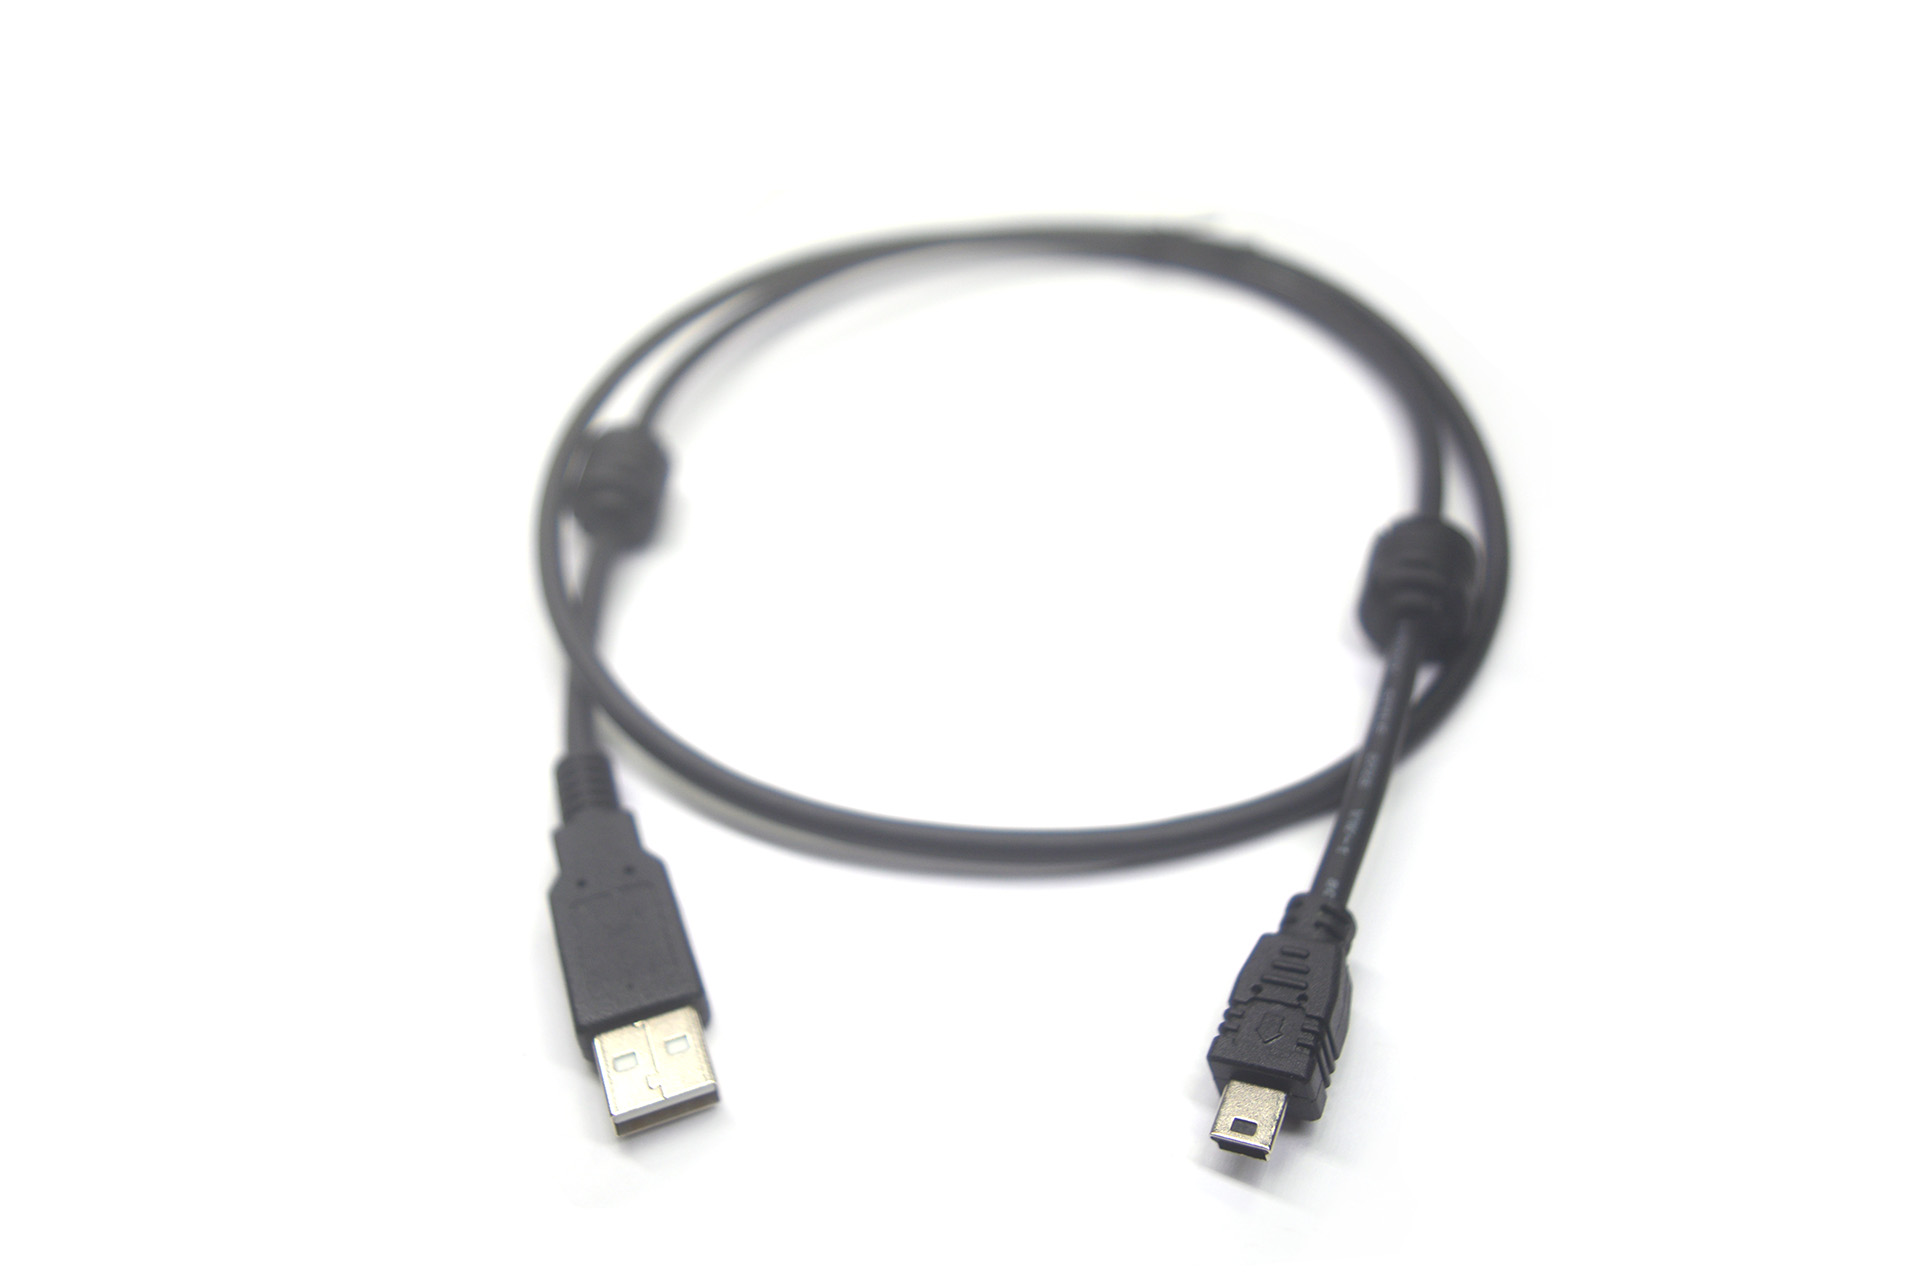 USB2.0 A to mini-B cable